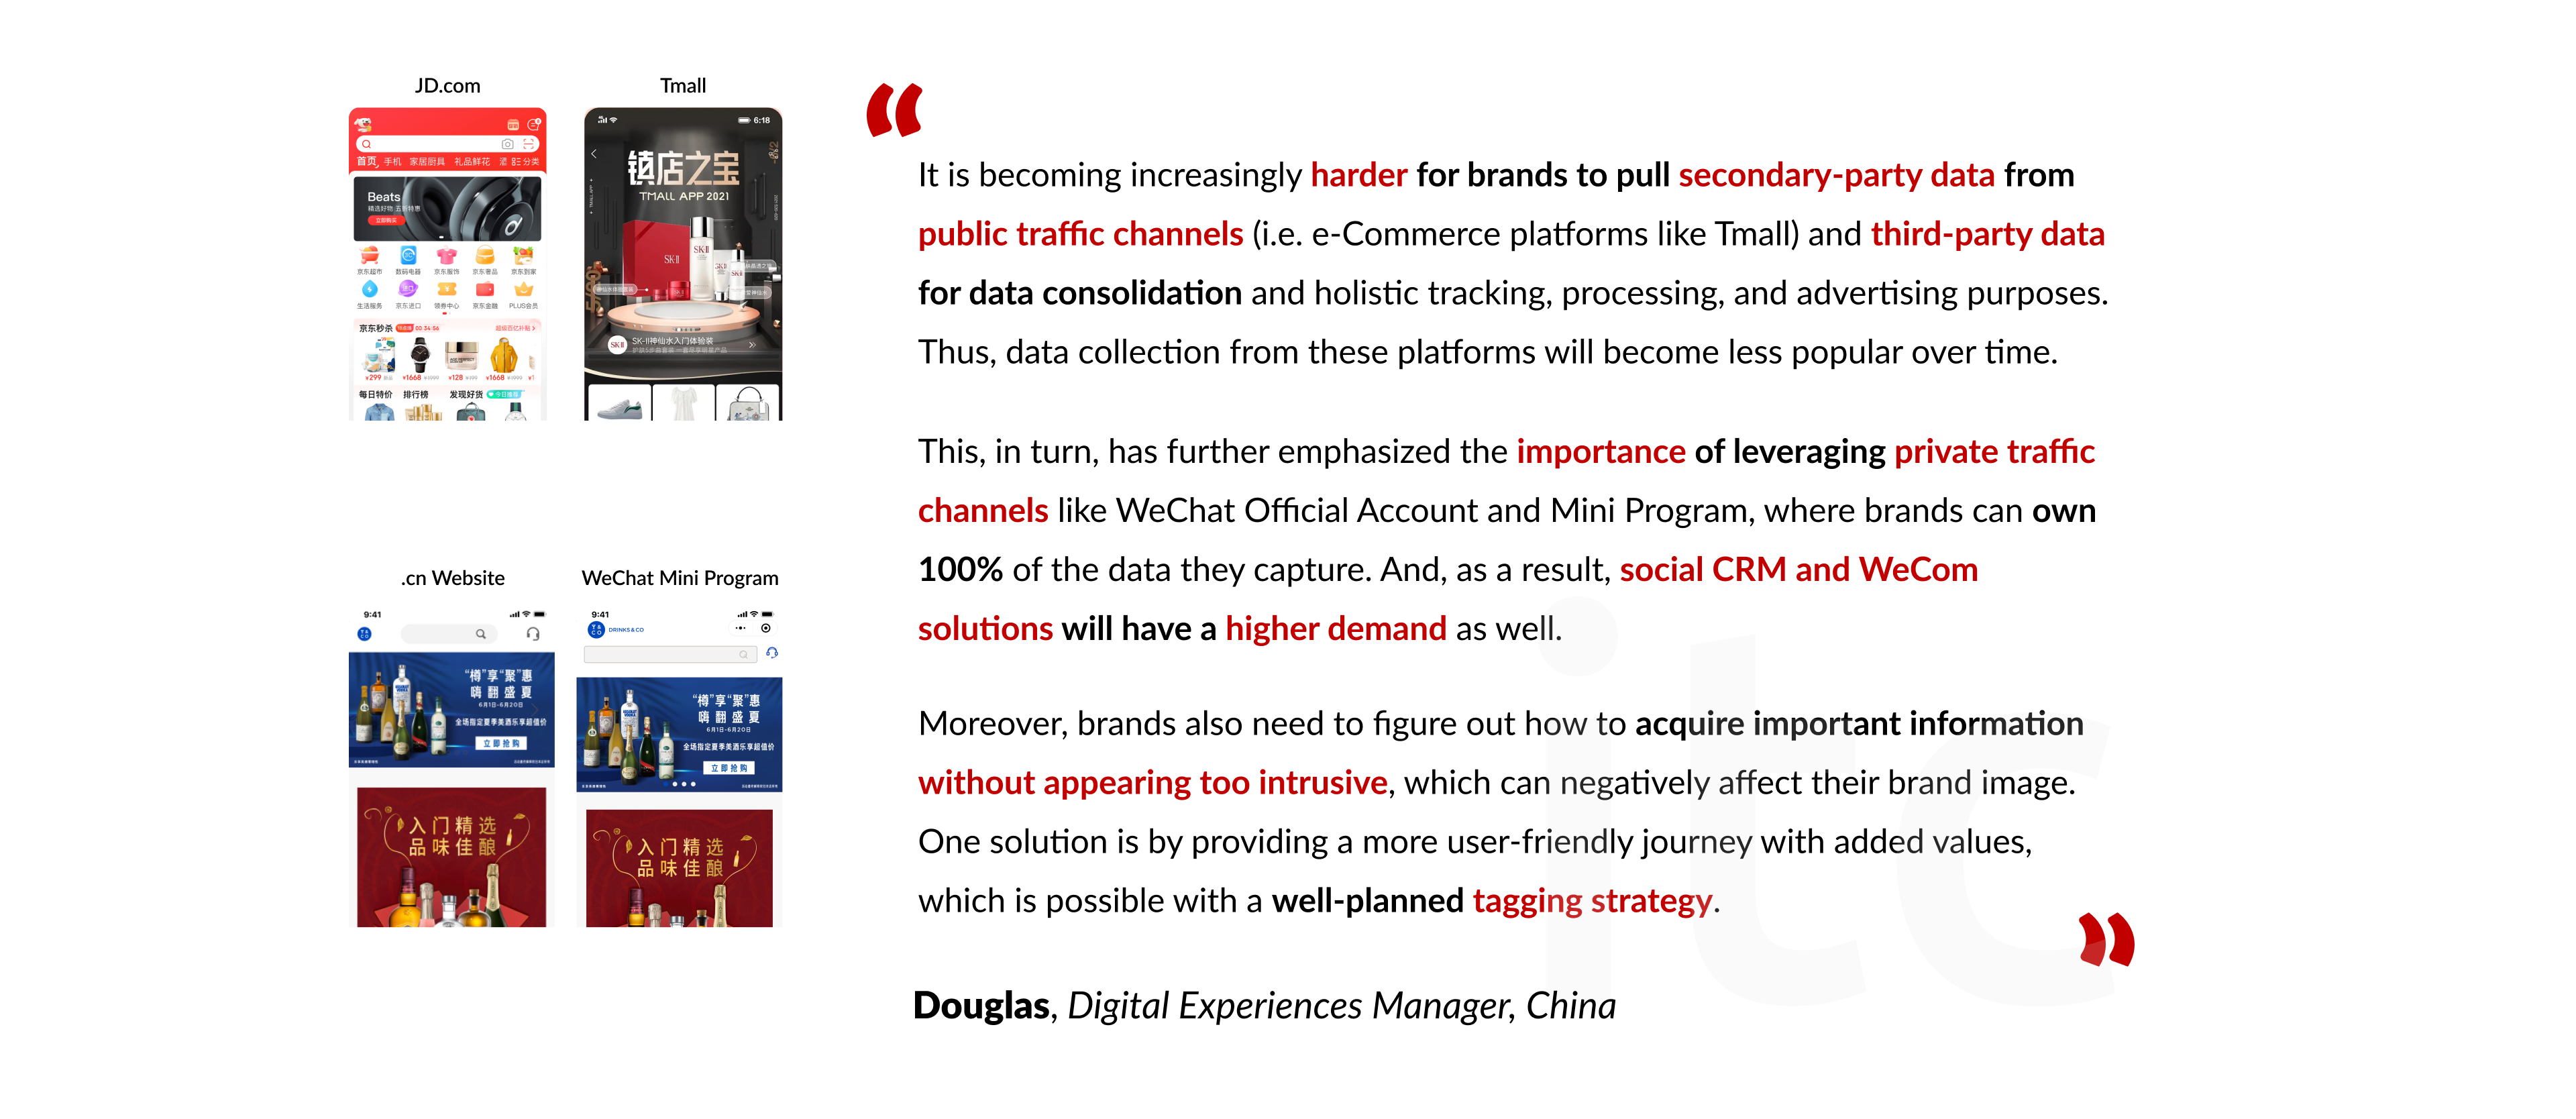 ITC's Digital Experiences Manager, China, Douglas, said that it would become harder for brands to pull secondary-party data and third-party data; thus, more than ever, businesses need to leverage first-party data from private traffic channels with marketing automation and social CRM tools to make the most of the acquired data